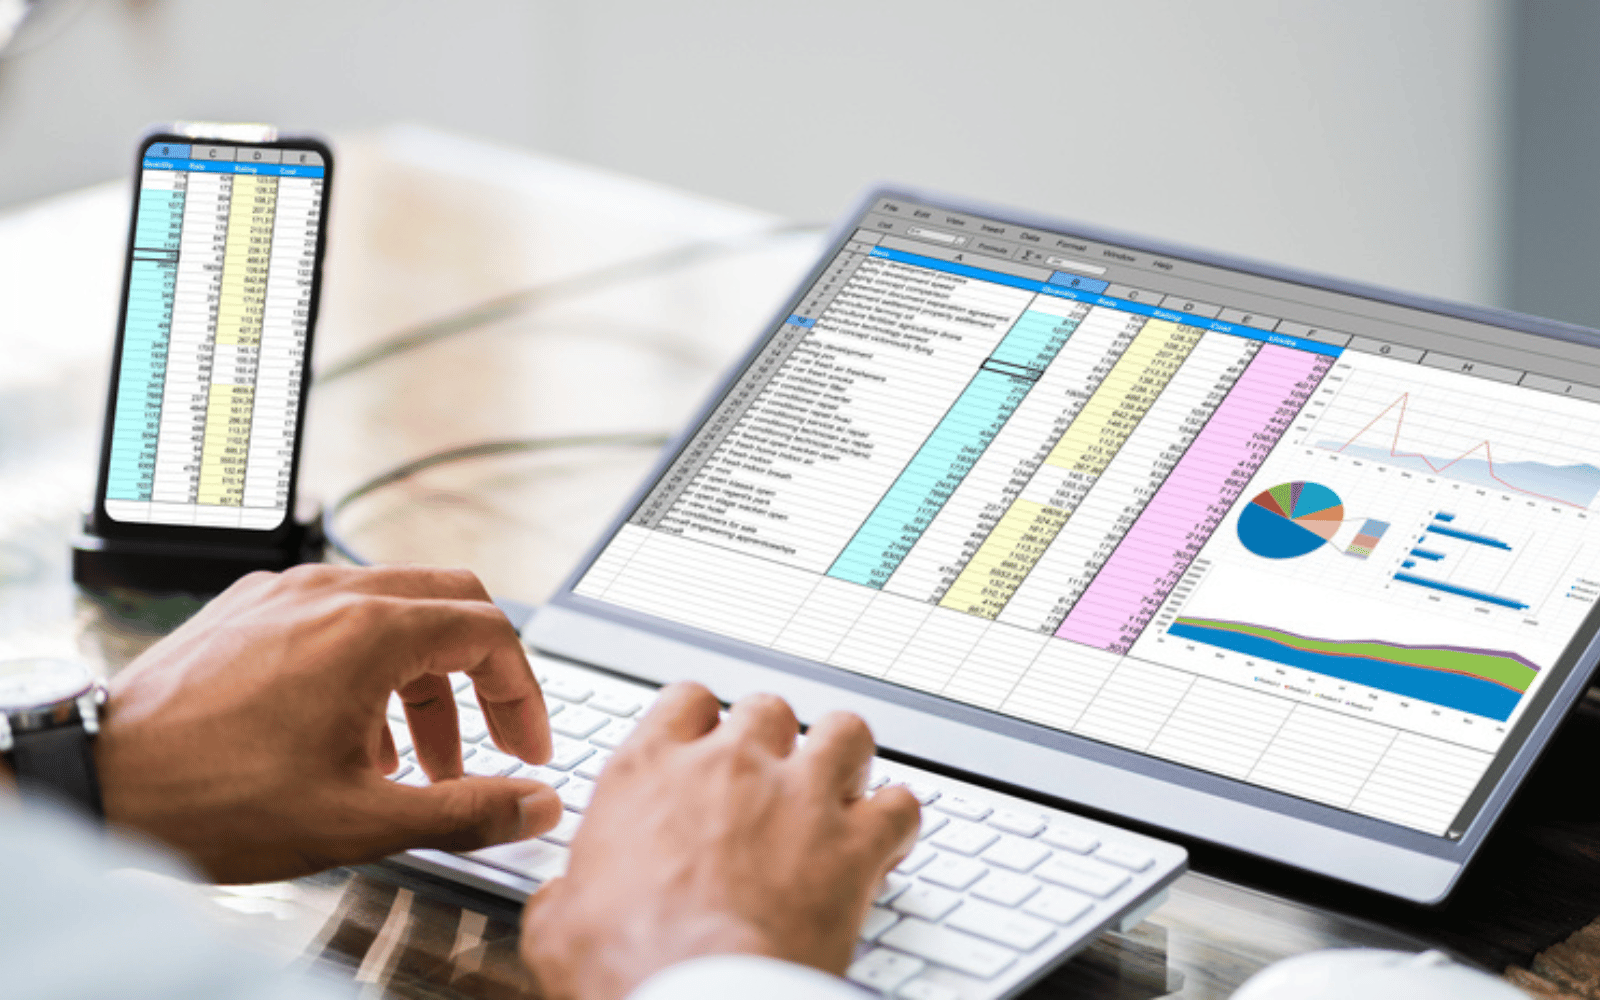 5 Awesome Spreadsheet Apps For the iPhone via @sejournal, @JuliaEMcCoy